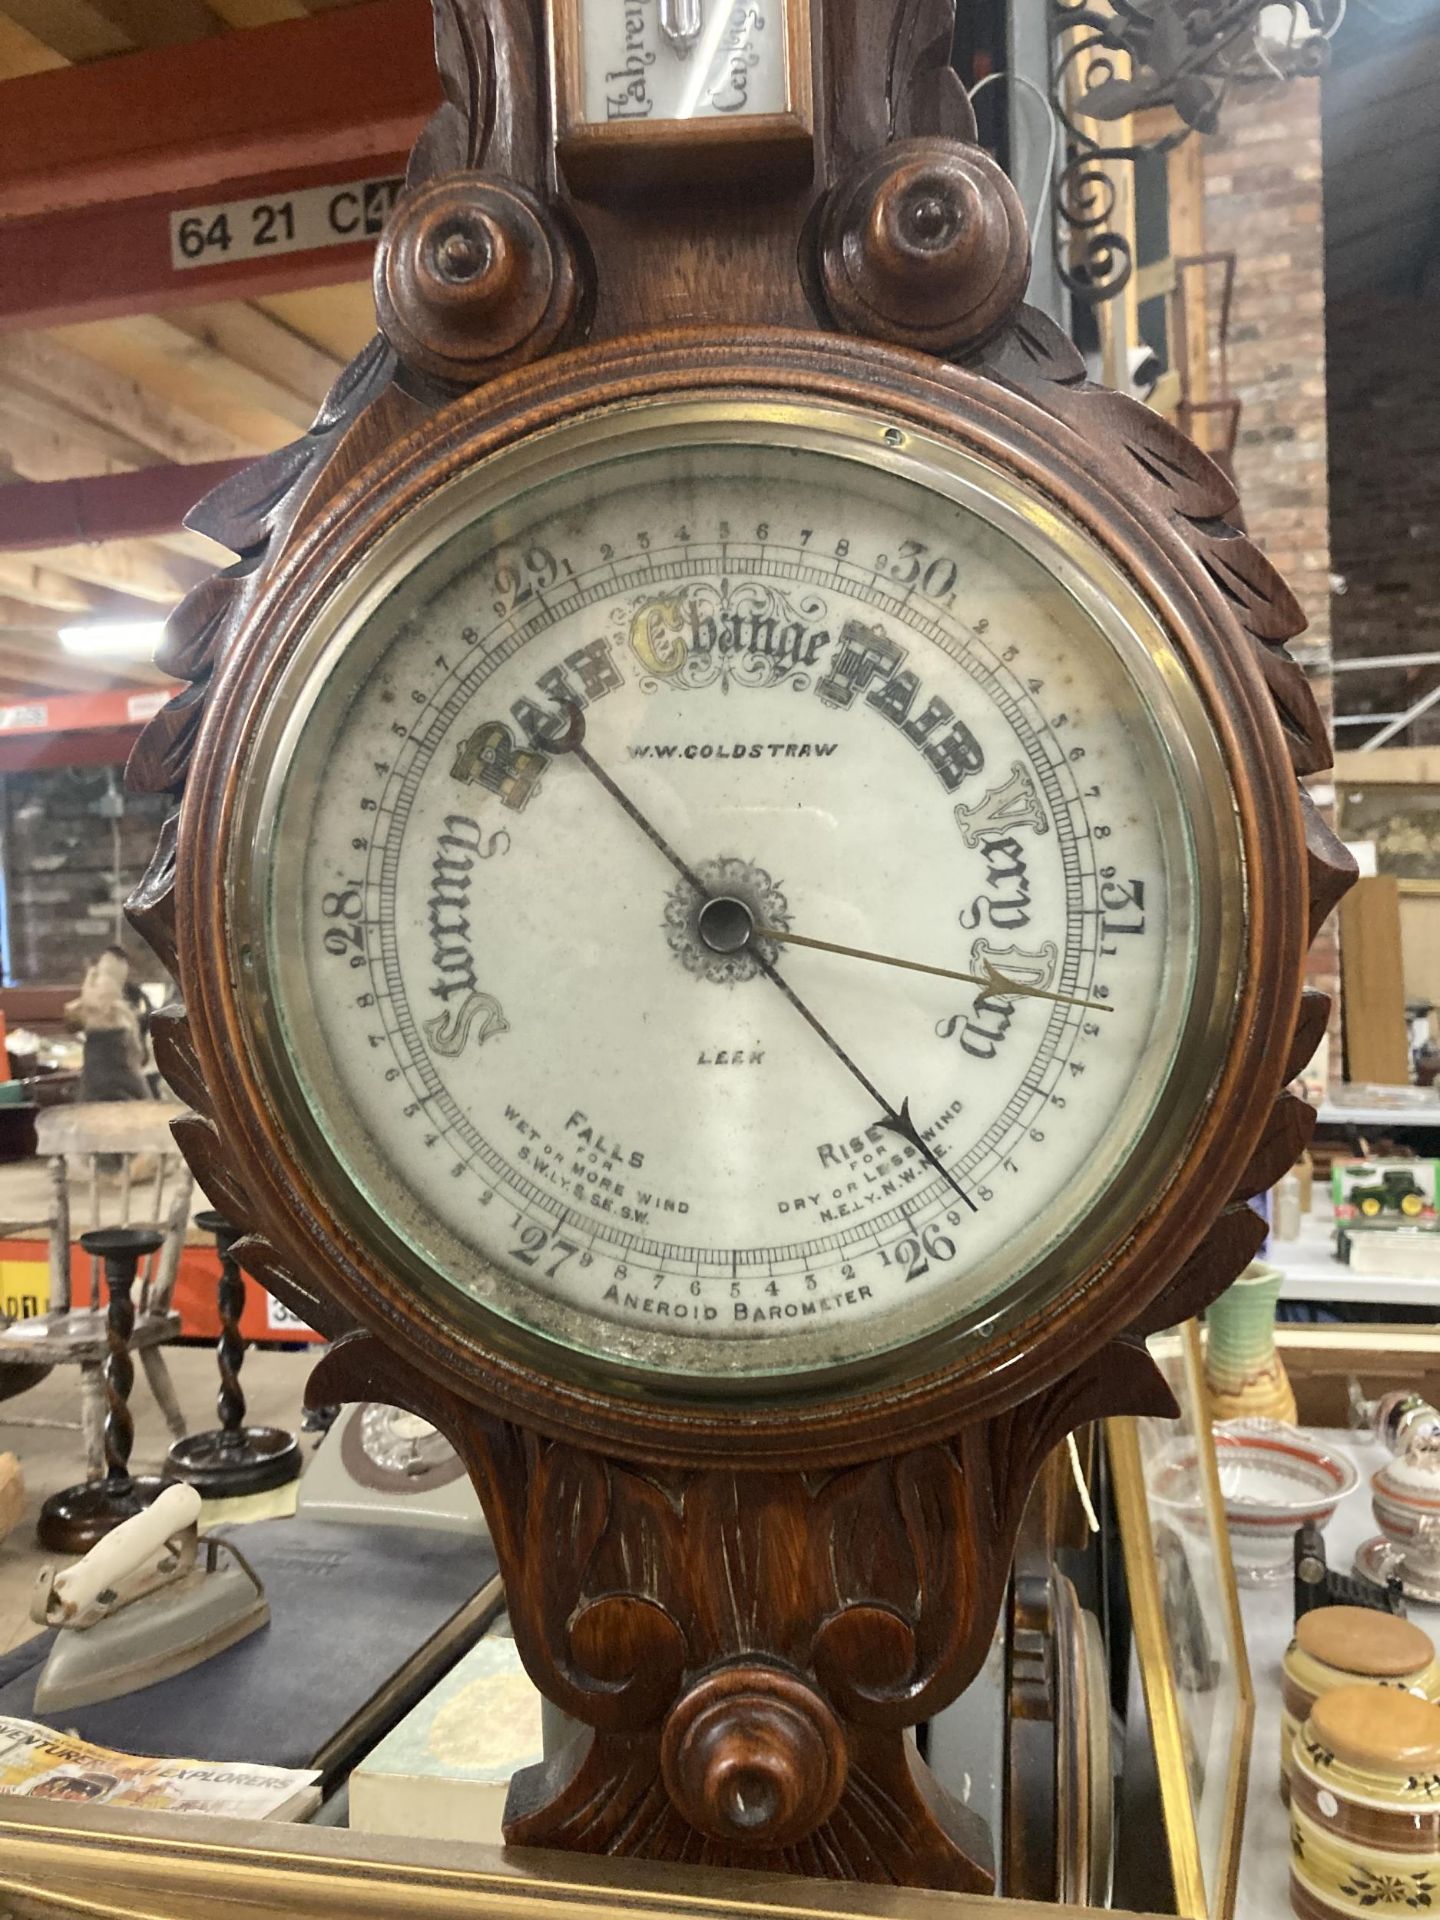 A W W GOLDSTRAW ANEROID BAROMETER IN A CARVED MAHOGANY CASE - Image 2 of 4